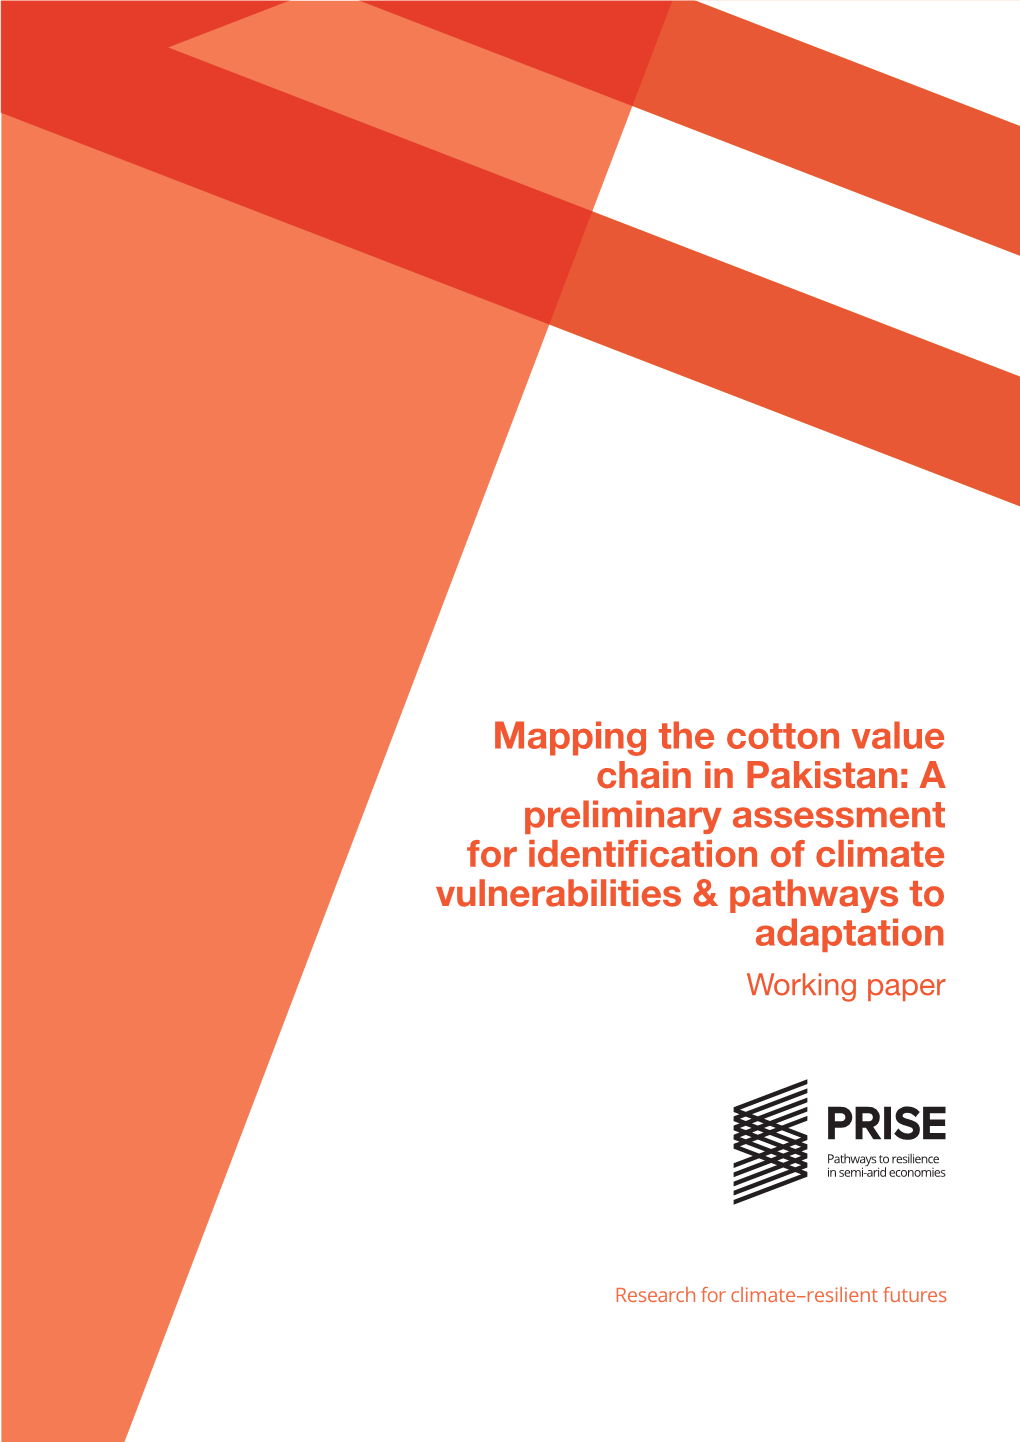 Mapping the Cotton Value Chain in Pakistan: a Preliminary Assessment for Identification of Climate Vulnerabilities & Pathways to Adaptation Working Paper